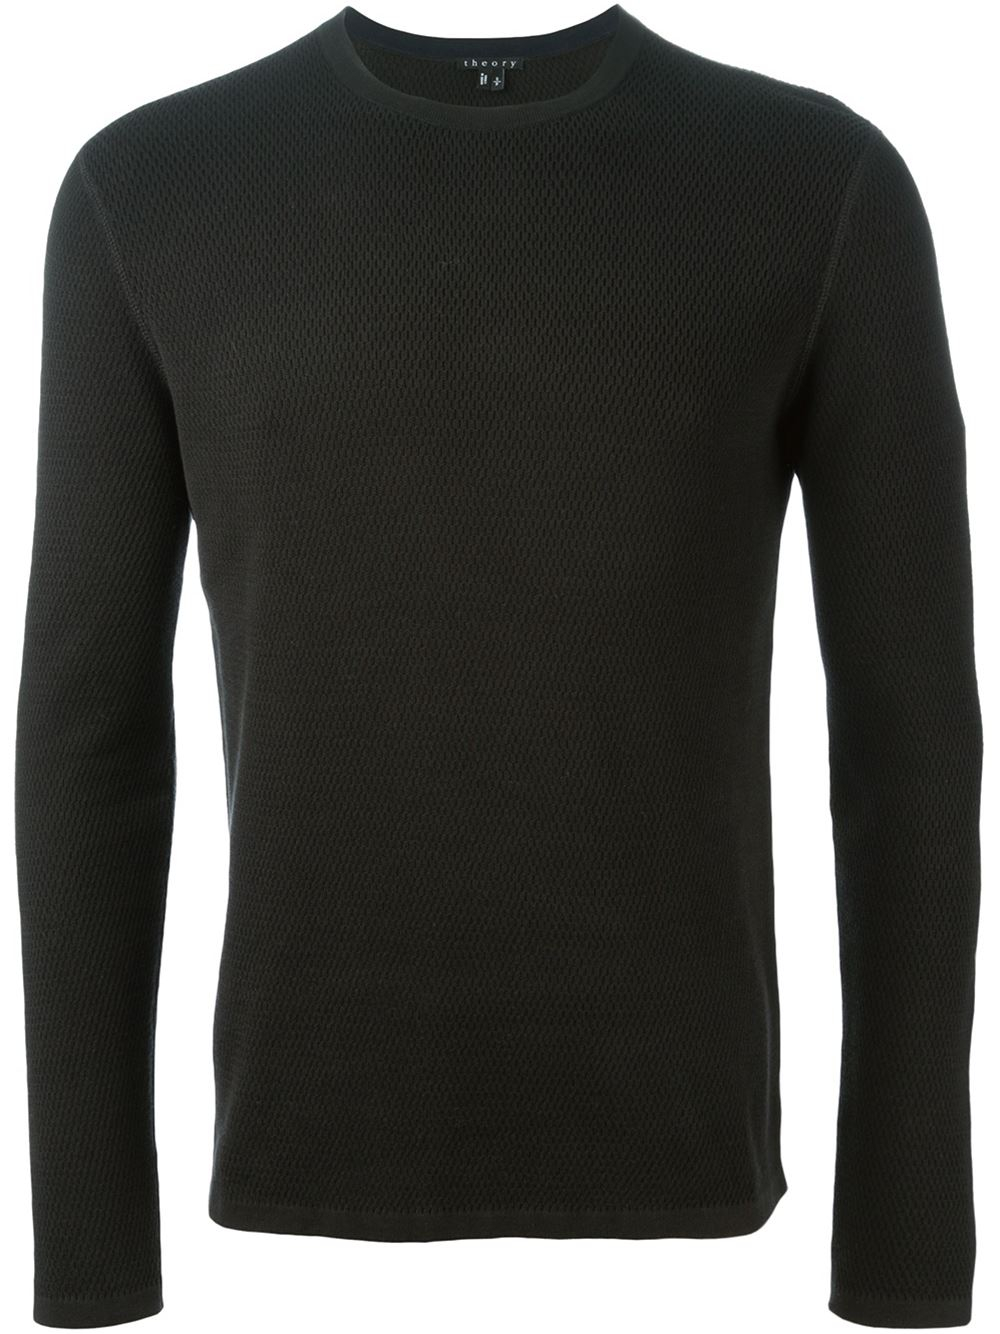 Lyst - Theory Textured Sweater in Black for Men